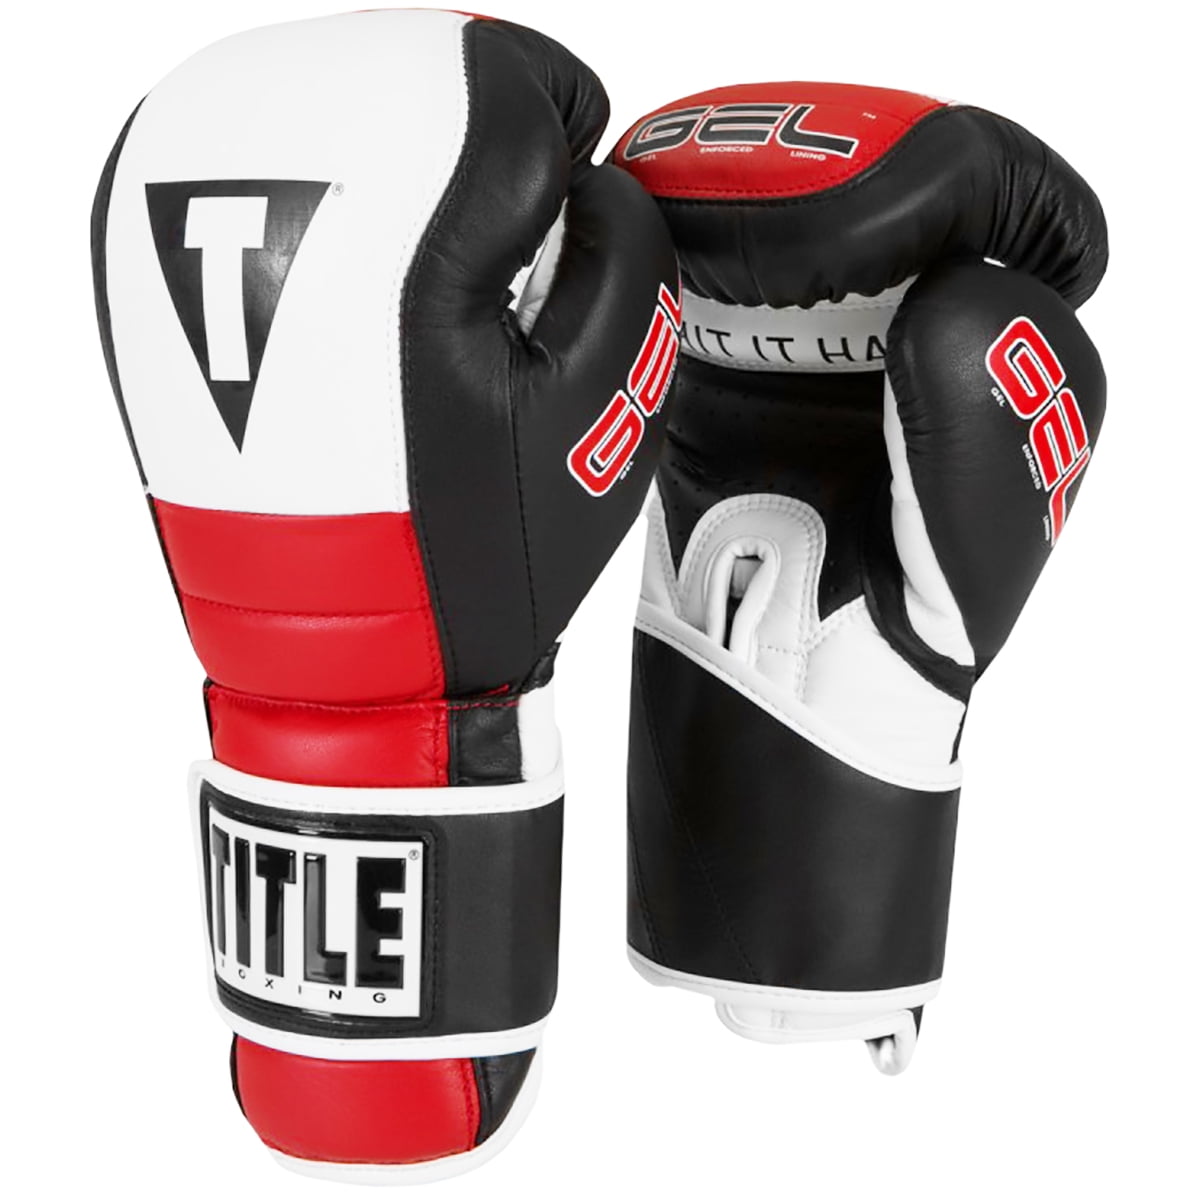 Gloves Shield Gel Title Boxing Complete Set Palm Pads Wraps 